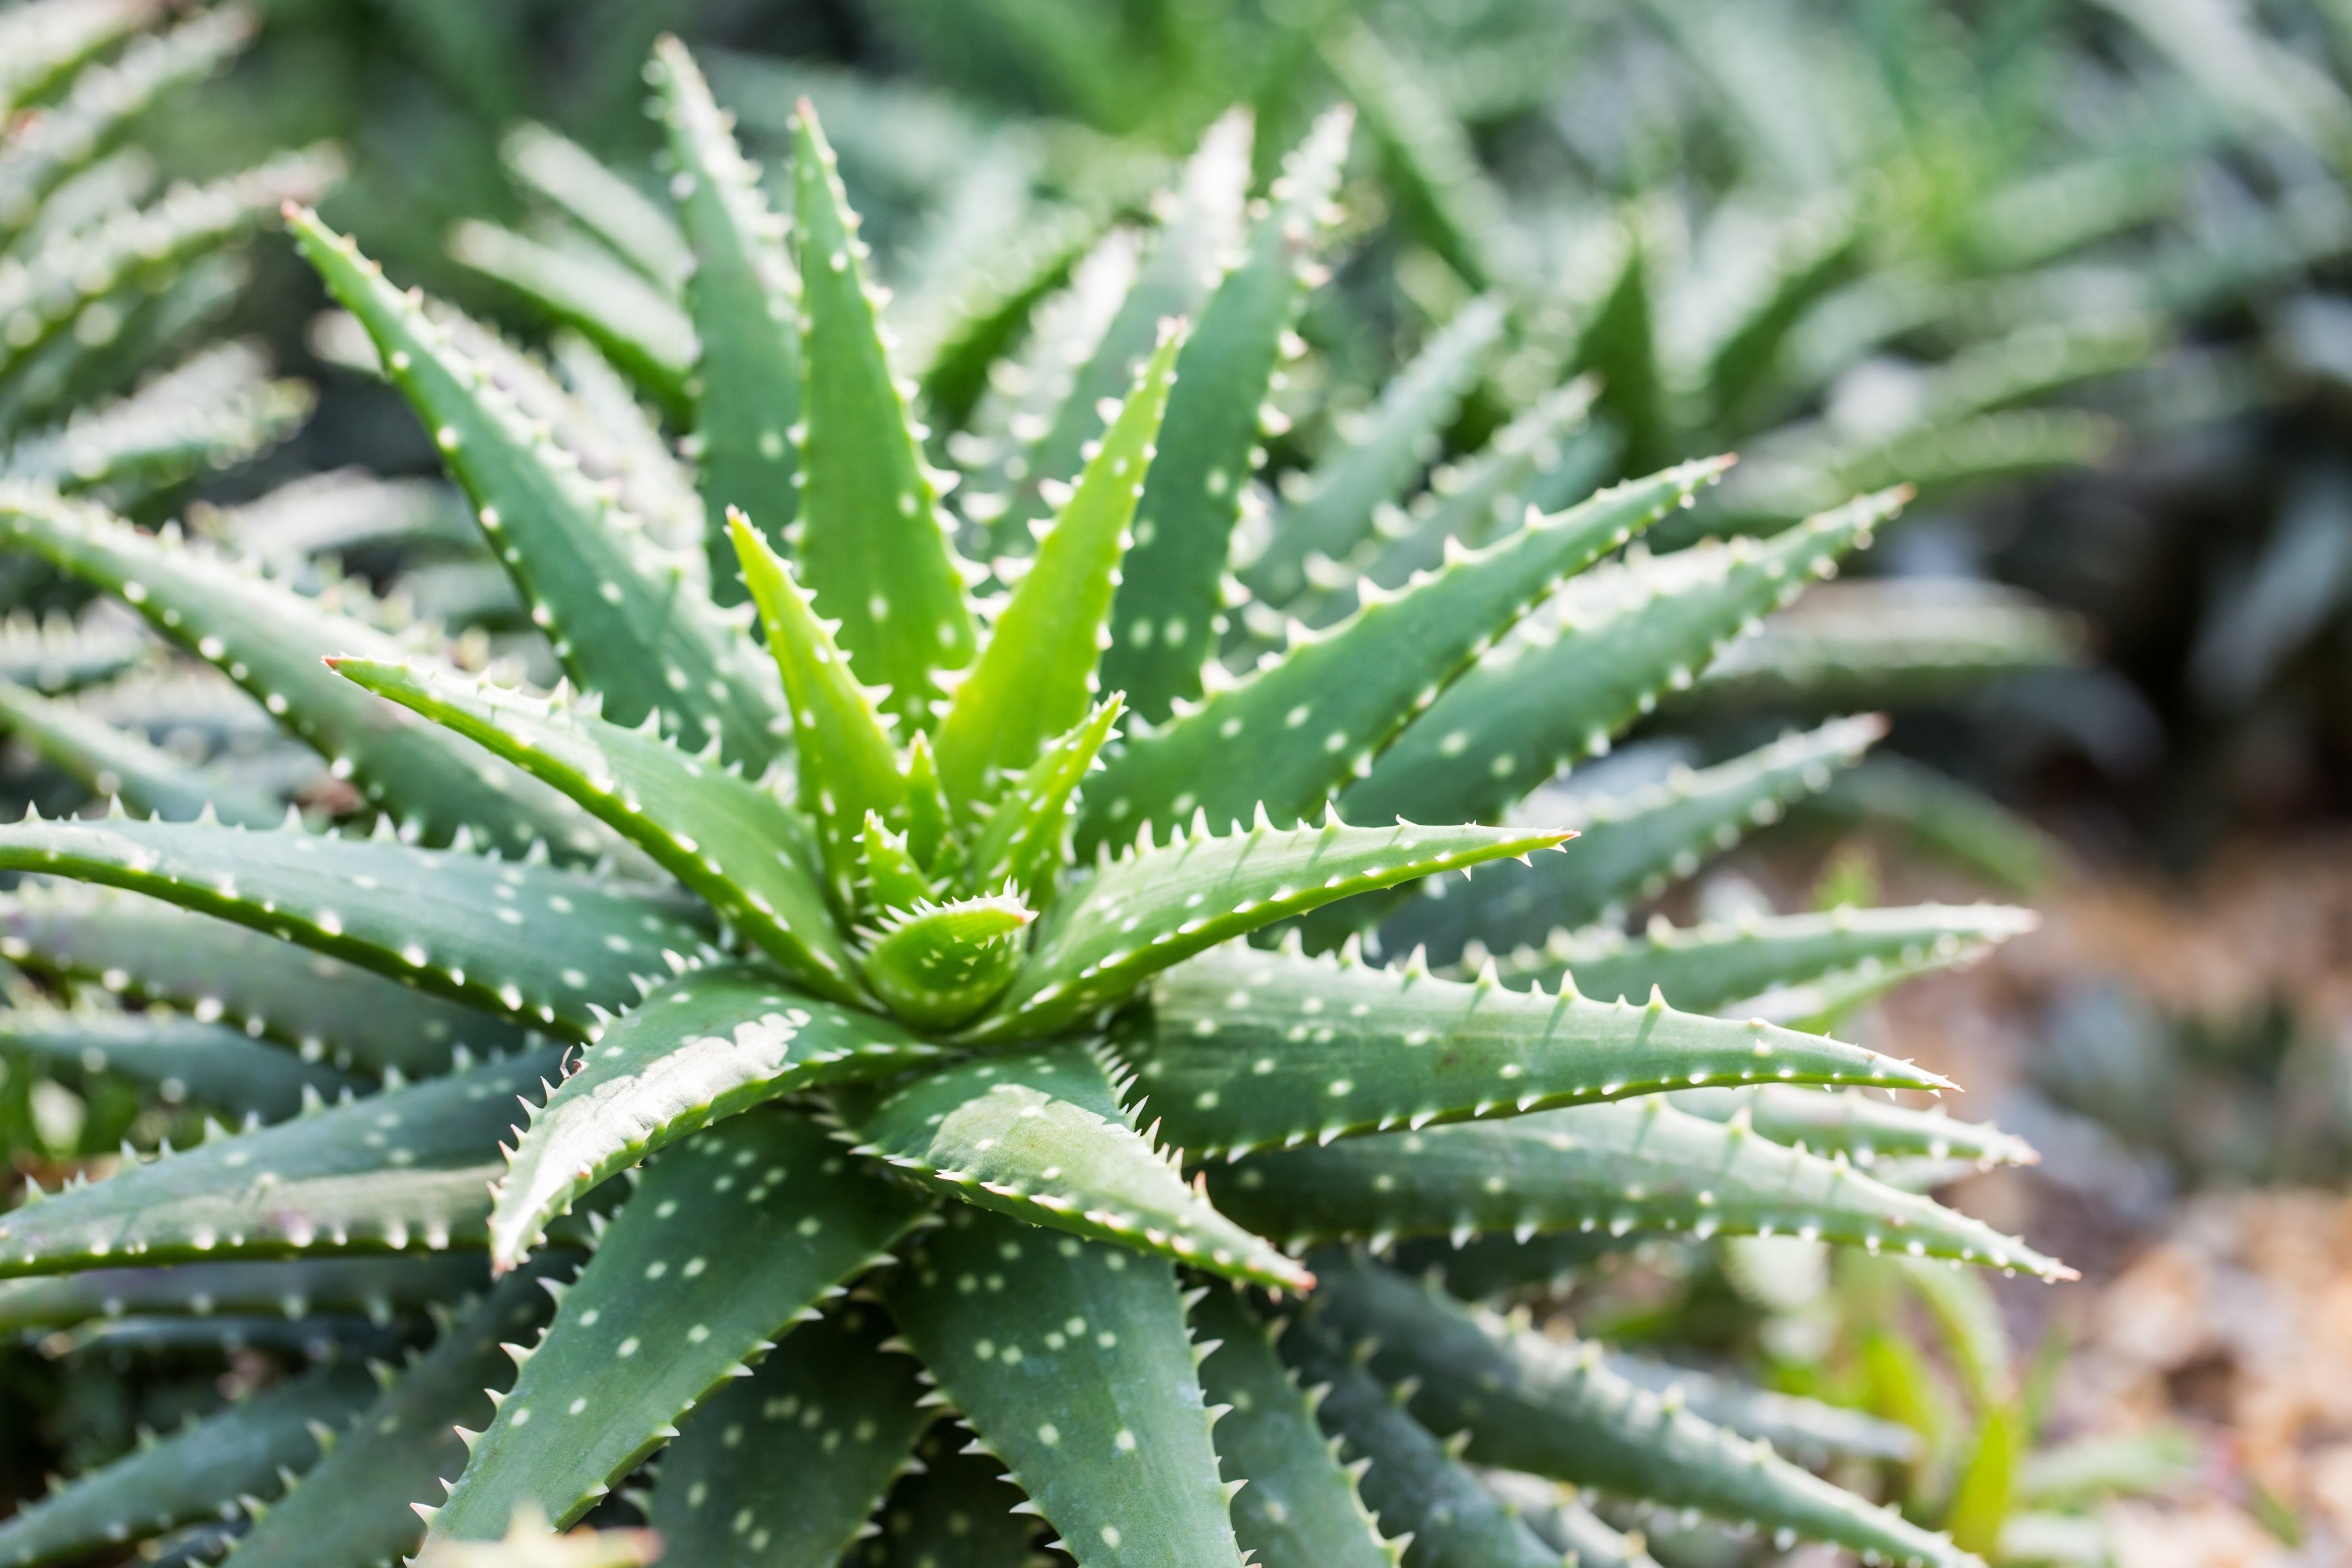 Aloe vera plants have many names, including the healing plant, the miracle plant and the burn plant. Photo: Shutterstock